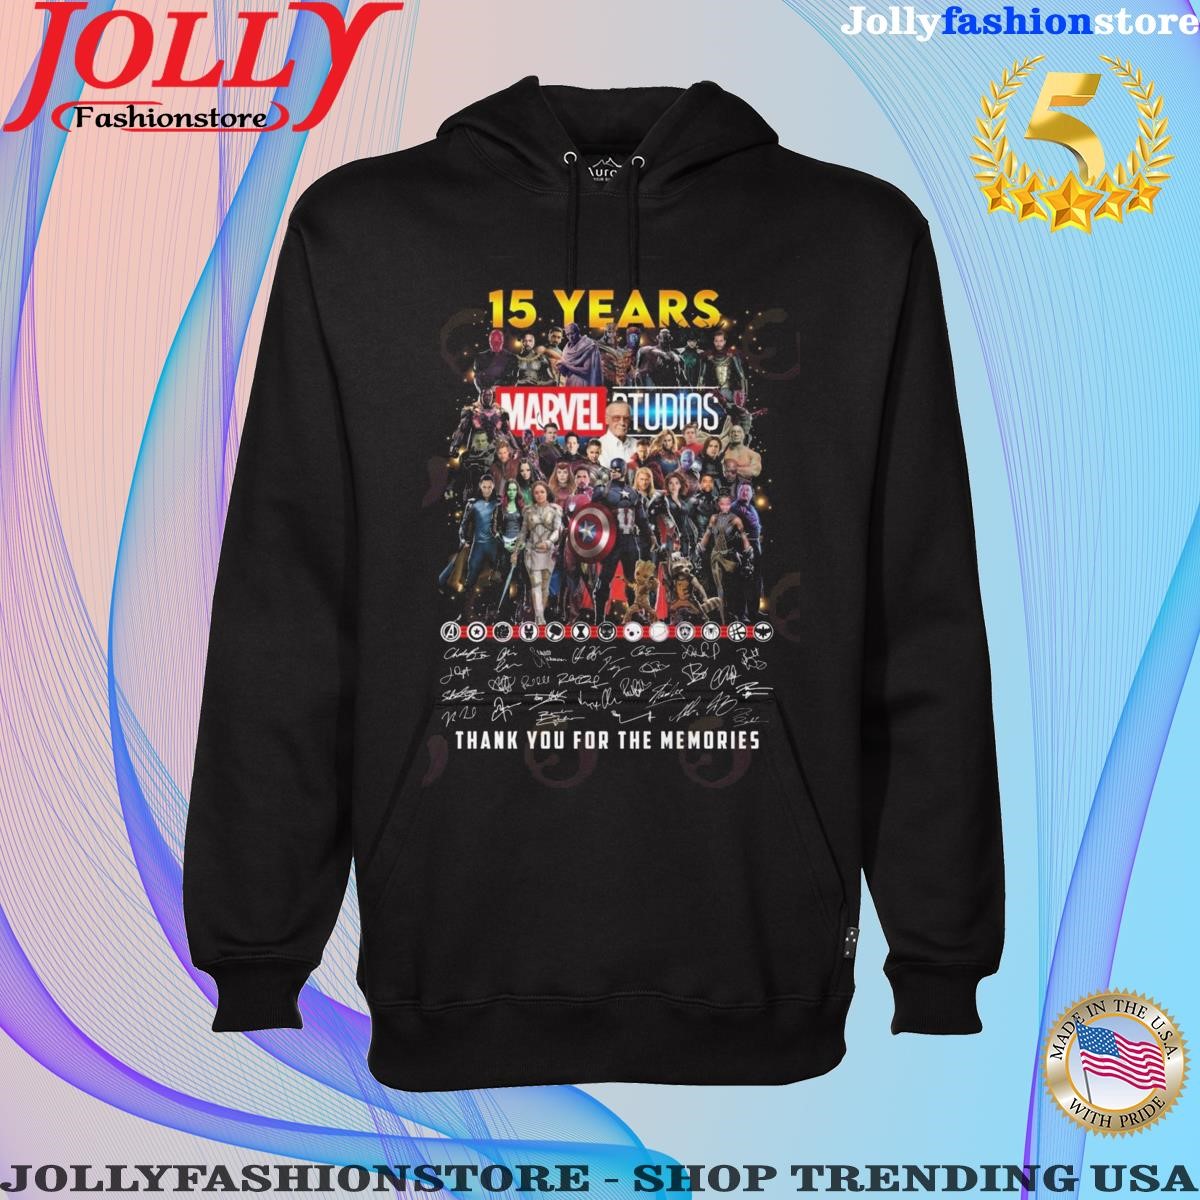 15 years Marvel studios avengers thank you for the memories signatures Hoodie shirt.png